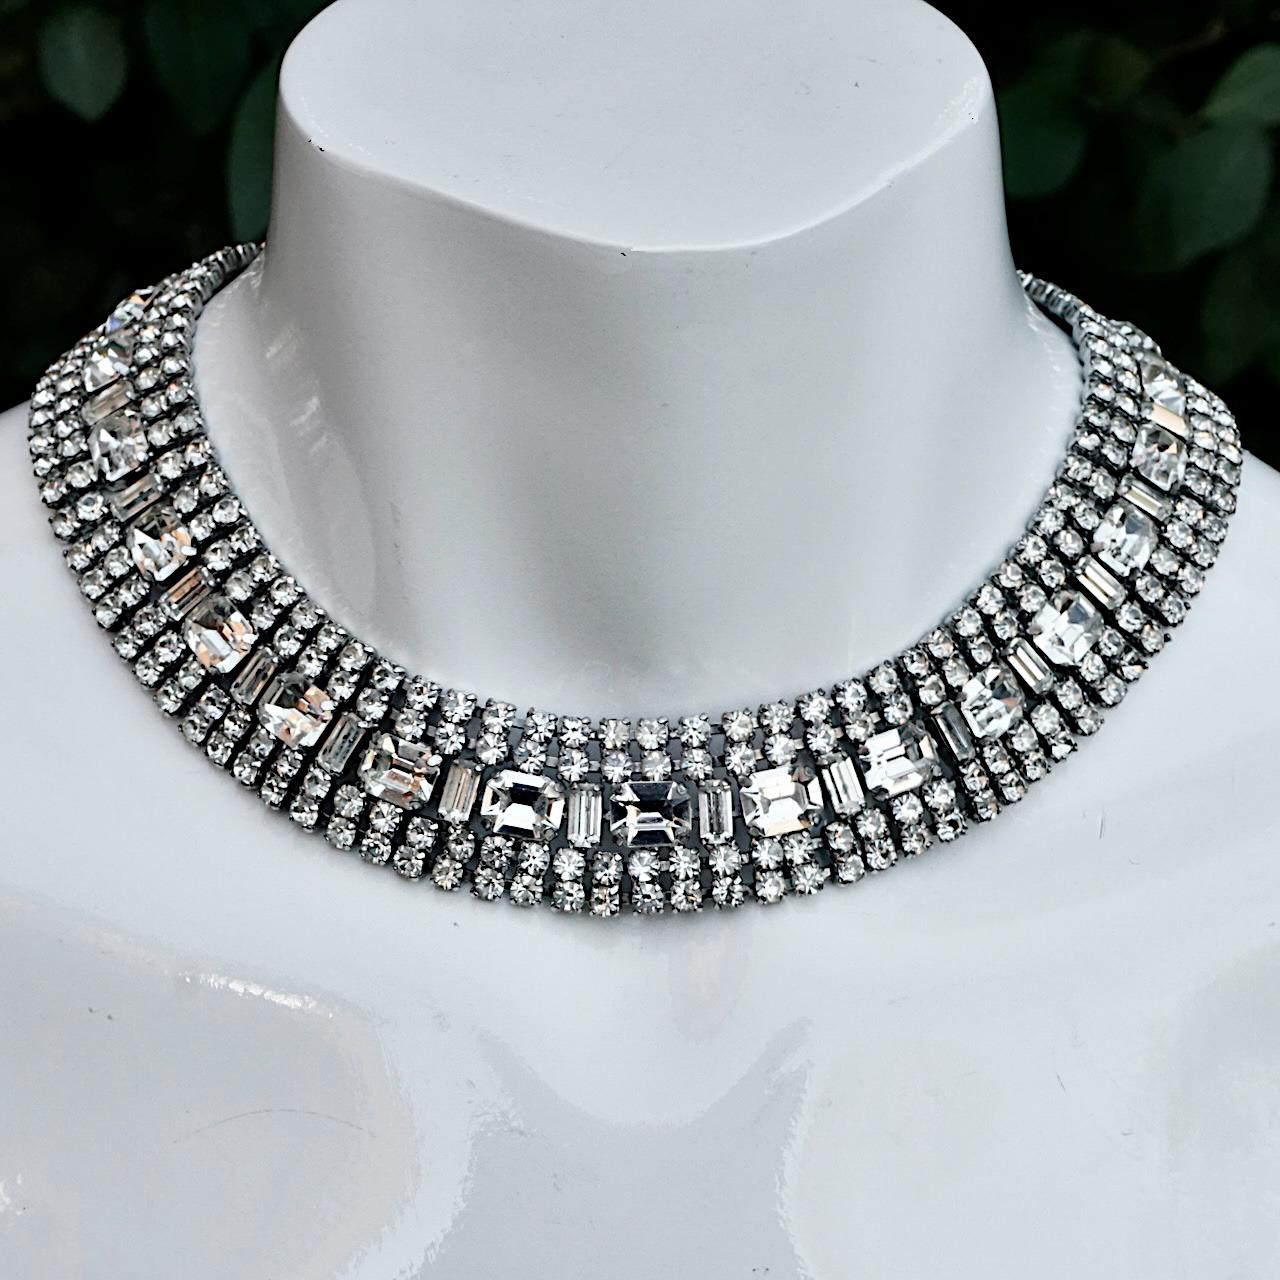 Wonderful silver tone collar / necklace set with clear sparkling baguette, emerald cut and round rhinestones. It is a small size measuring inside length 37cm / 14.56 inches by width 2.3 cm / .9 inch. The necklace is slightly curved and sits